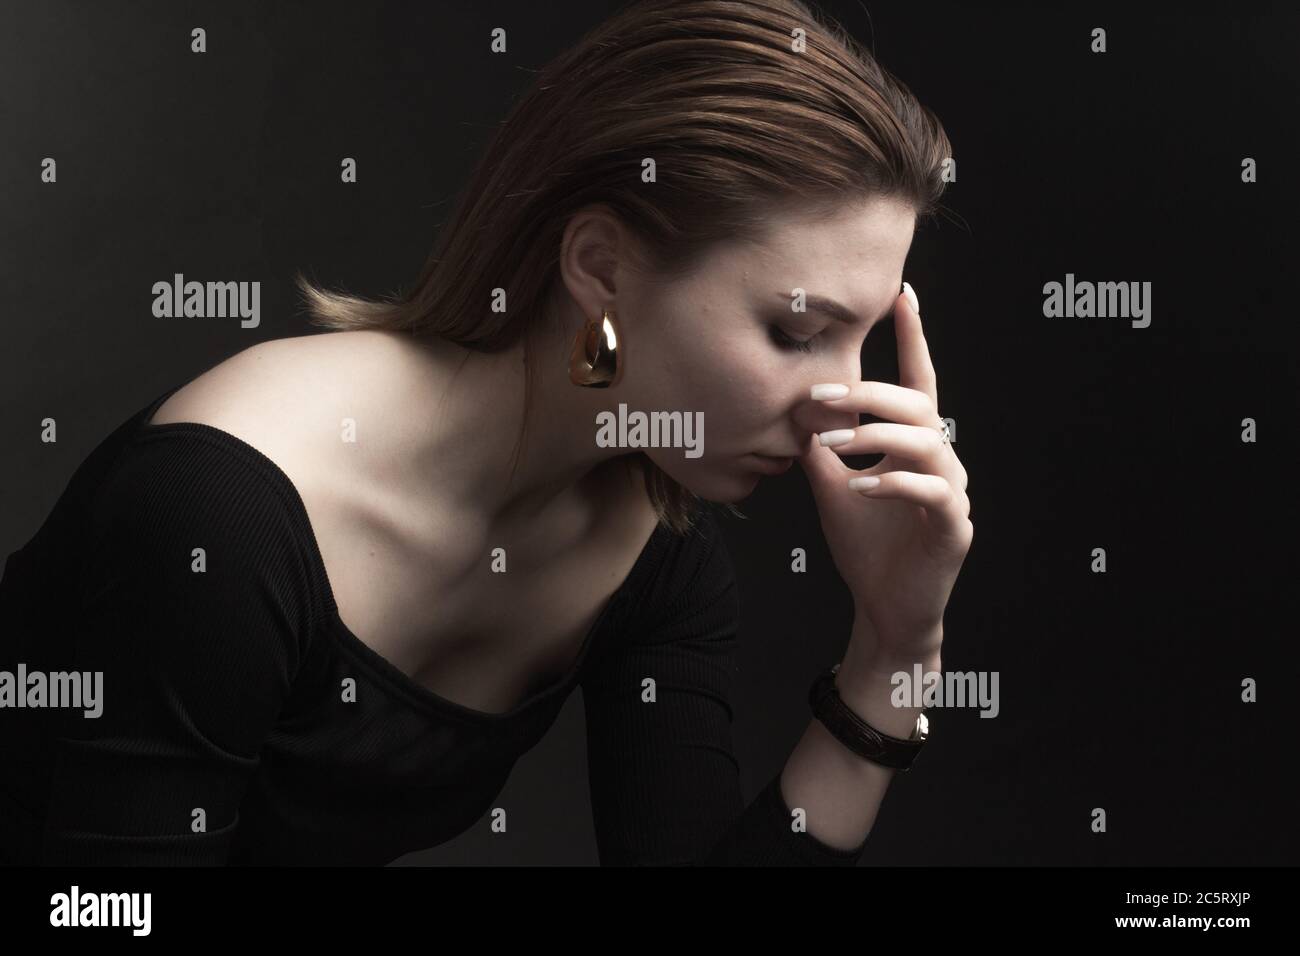 Portrait in the photo Studio of a brown-haired girl, on a black background in black clothes with open shoulders. Short hair. turned in profile, hand to touch the face and nose. Pensive and sad expression Stock Photo